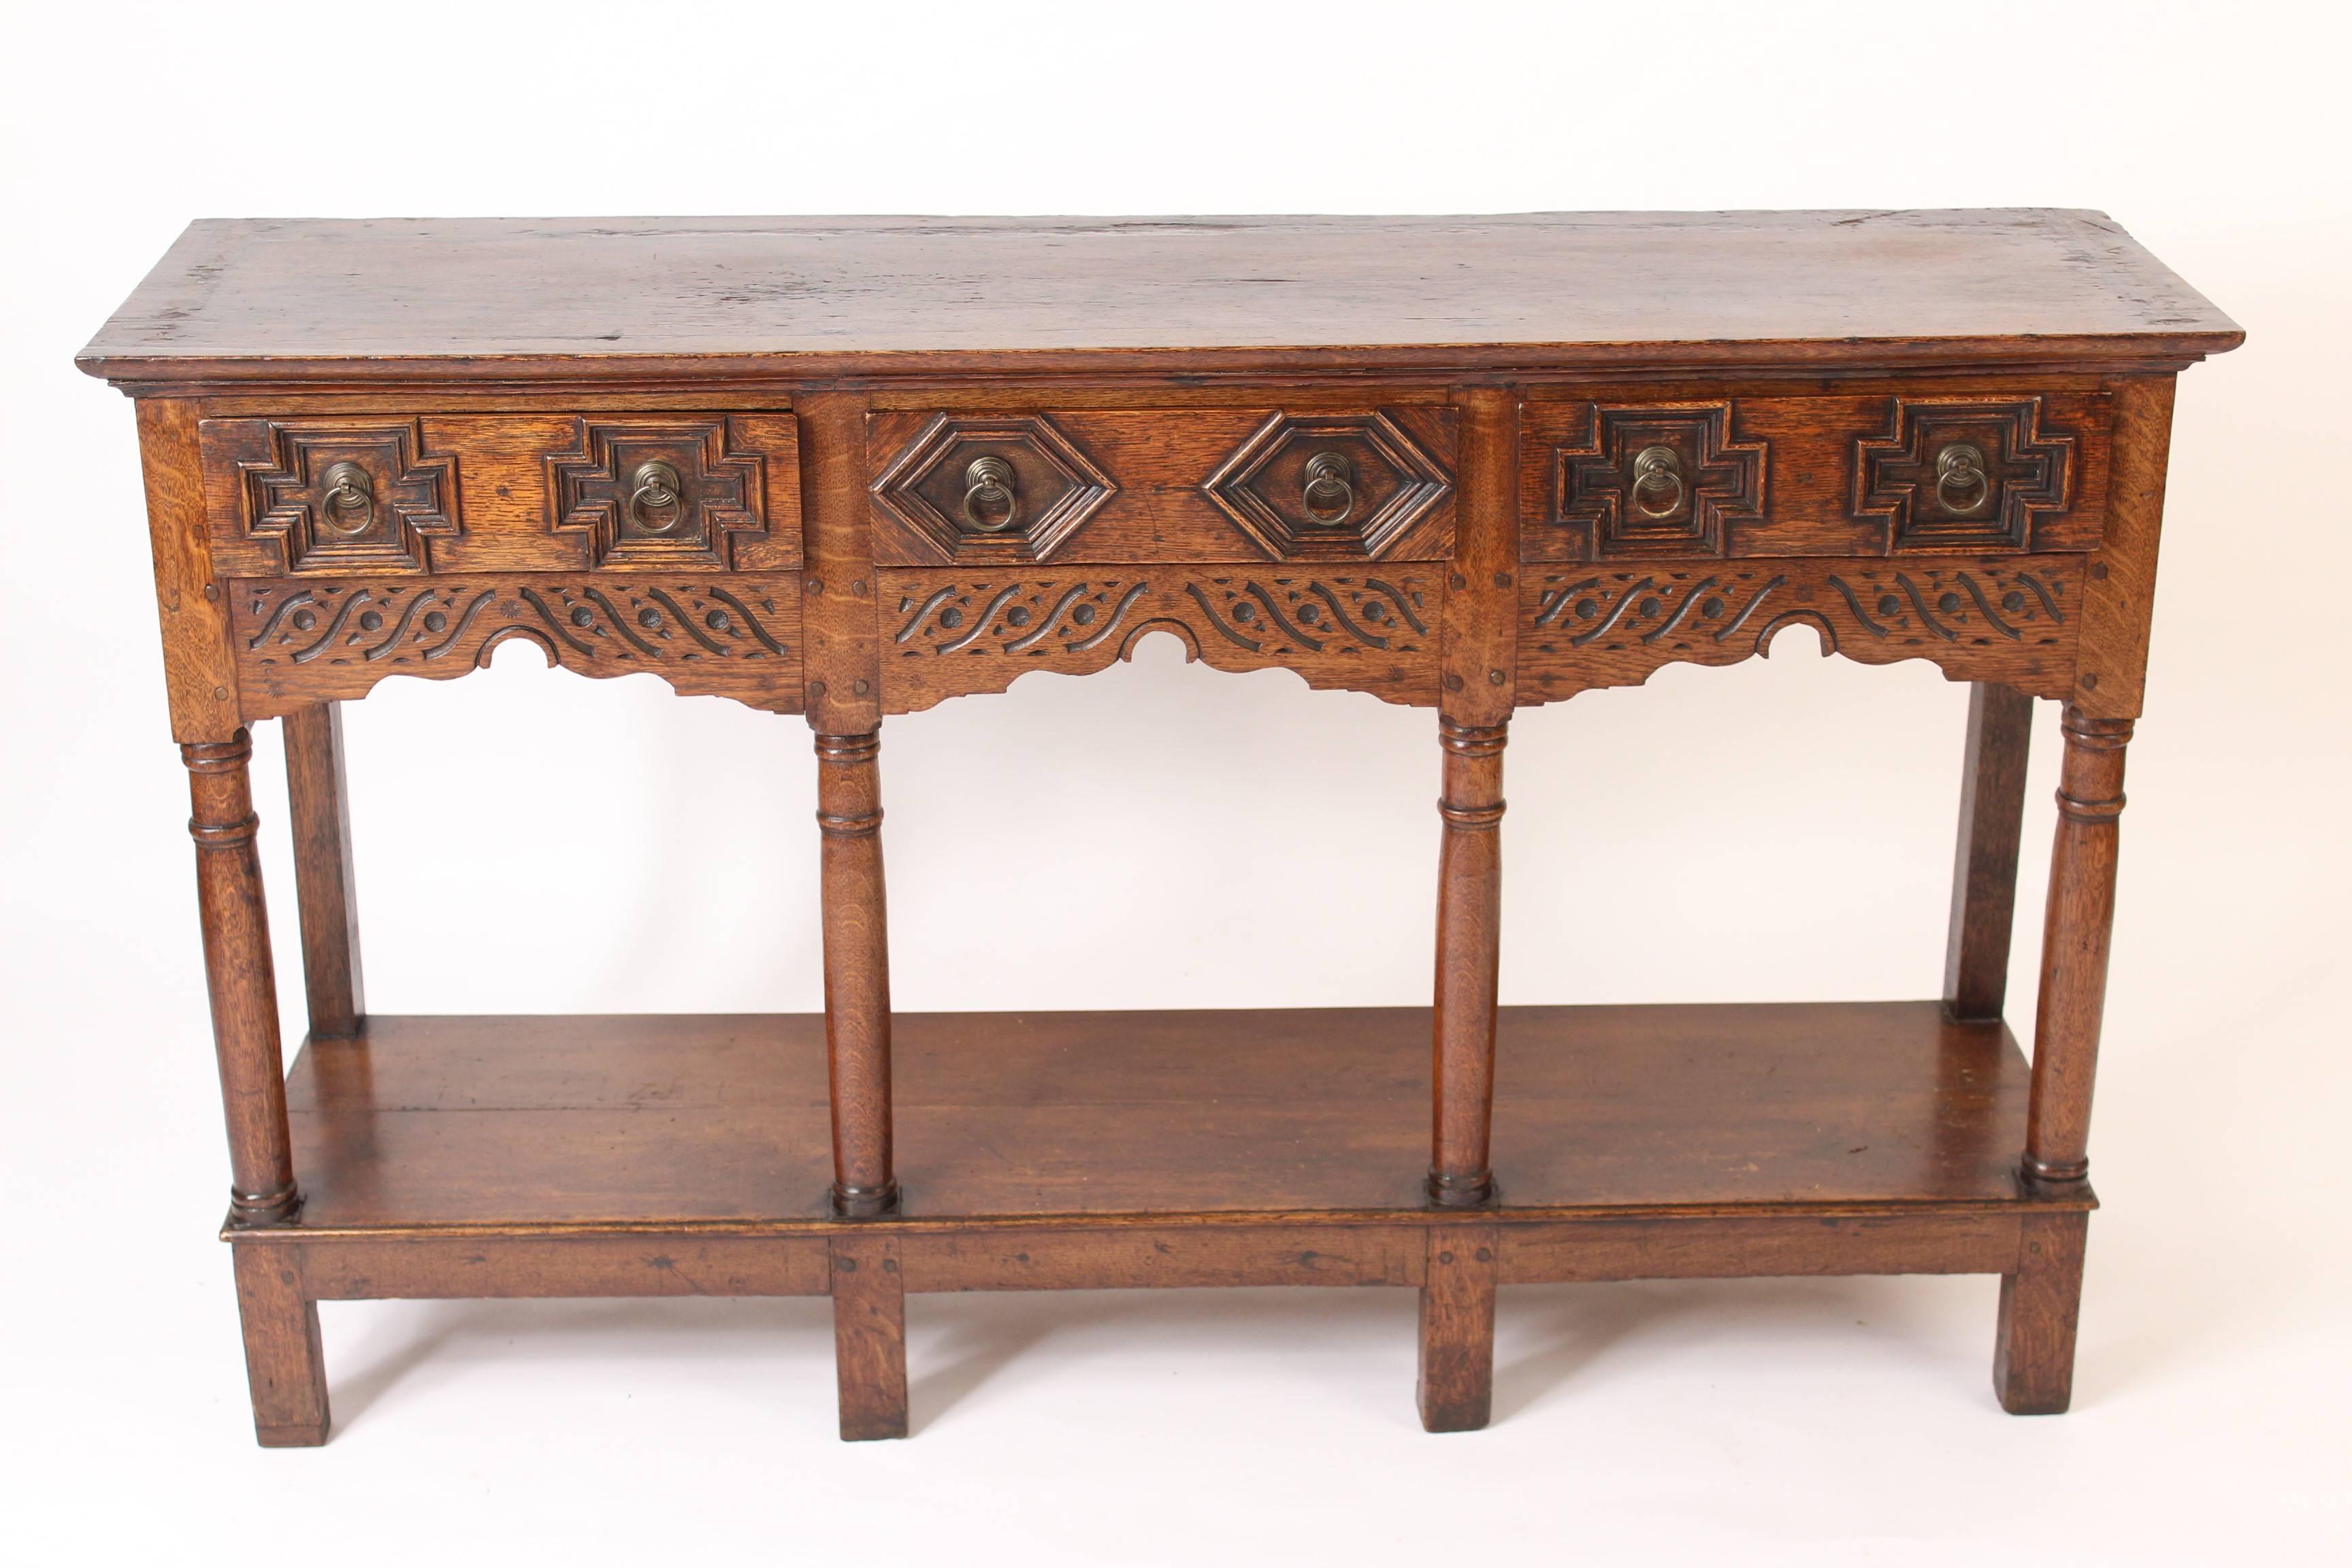 Antique Jacobean style English oak dresser base, 19th century. Nice quality workmanship, good wood color, old period construction, hand dovetailed drawers, mortise, tenon and dowel construction. Hard to find depth of 13.5